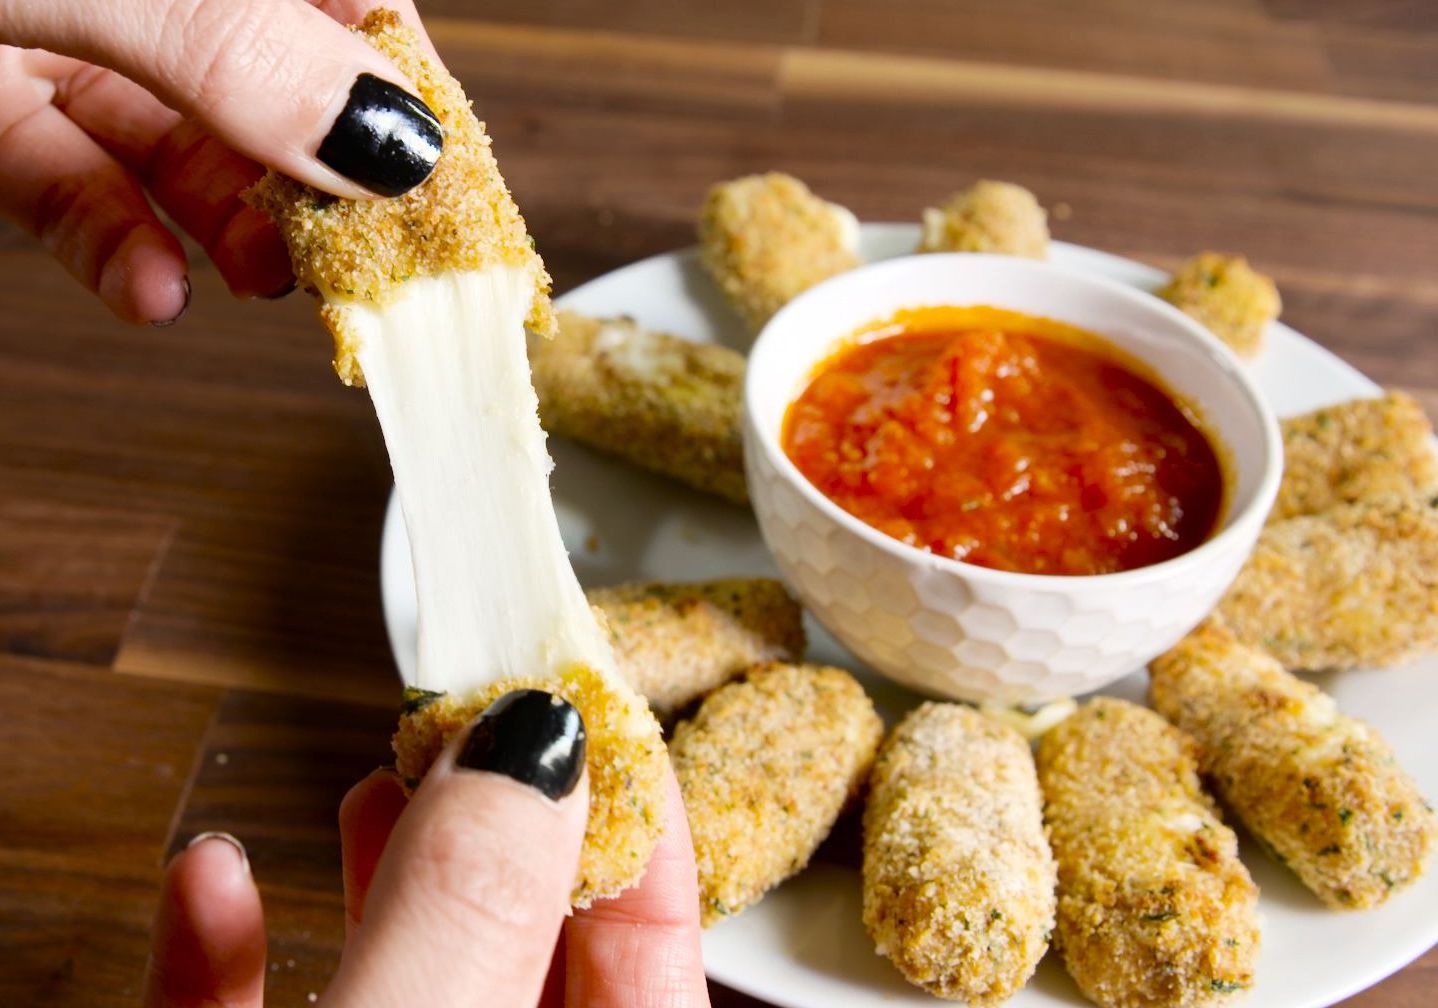 🍪 We Know Whether You’re in Your 20s or 30s Based on Your Snack Preferences stretchy mozzarella stick